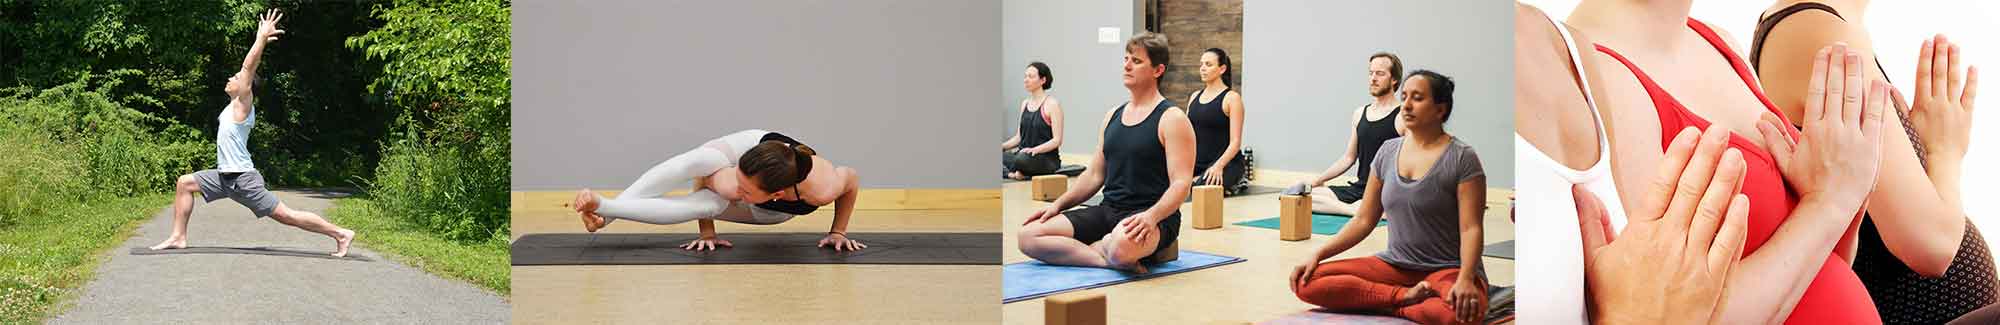 yoga-for-all at honor yoga